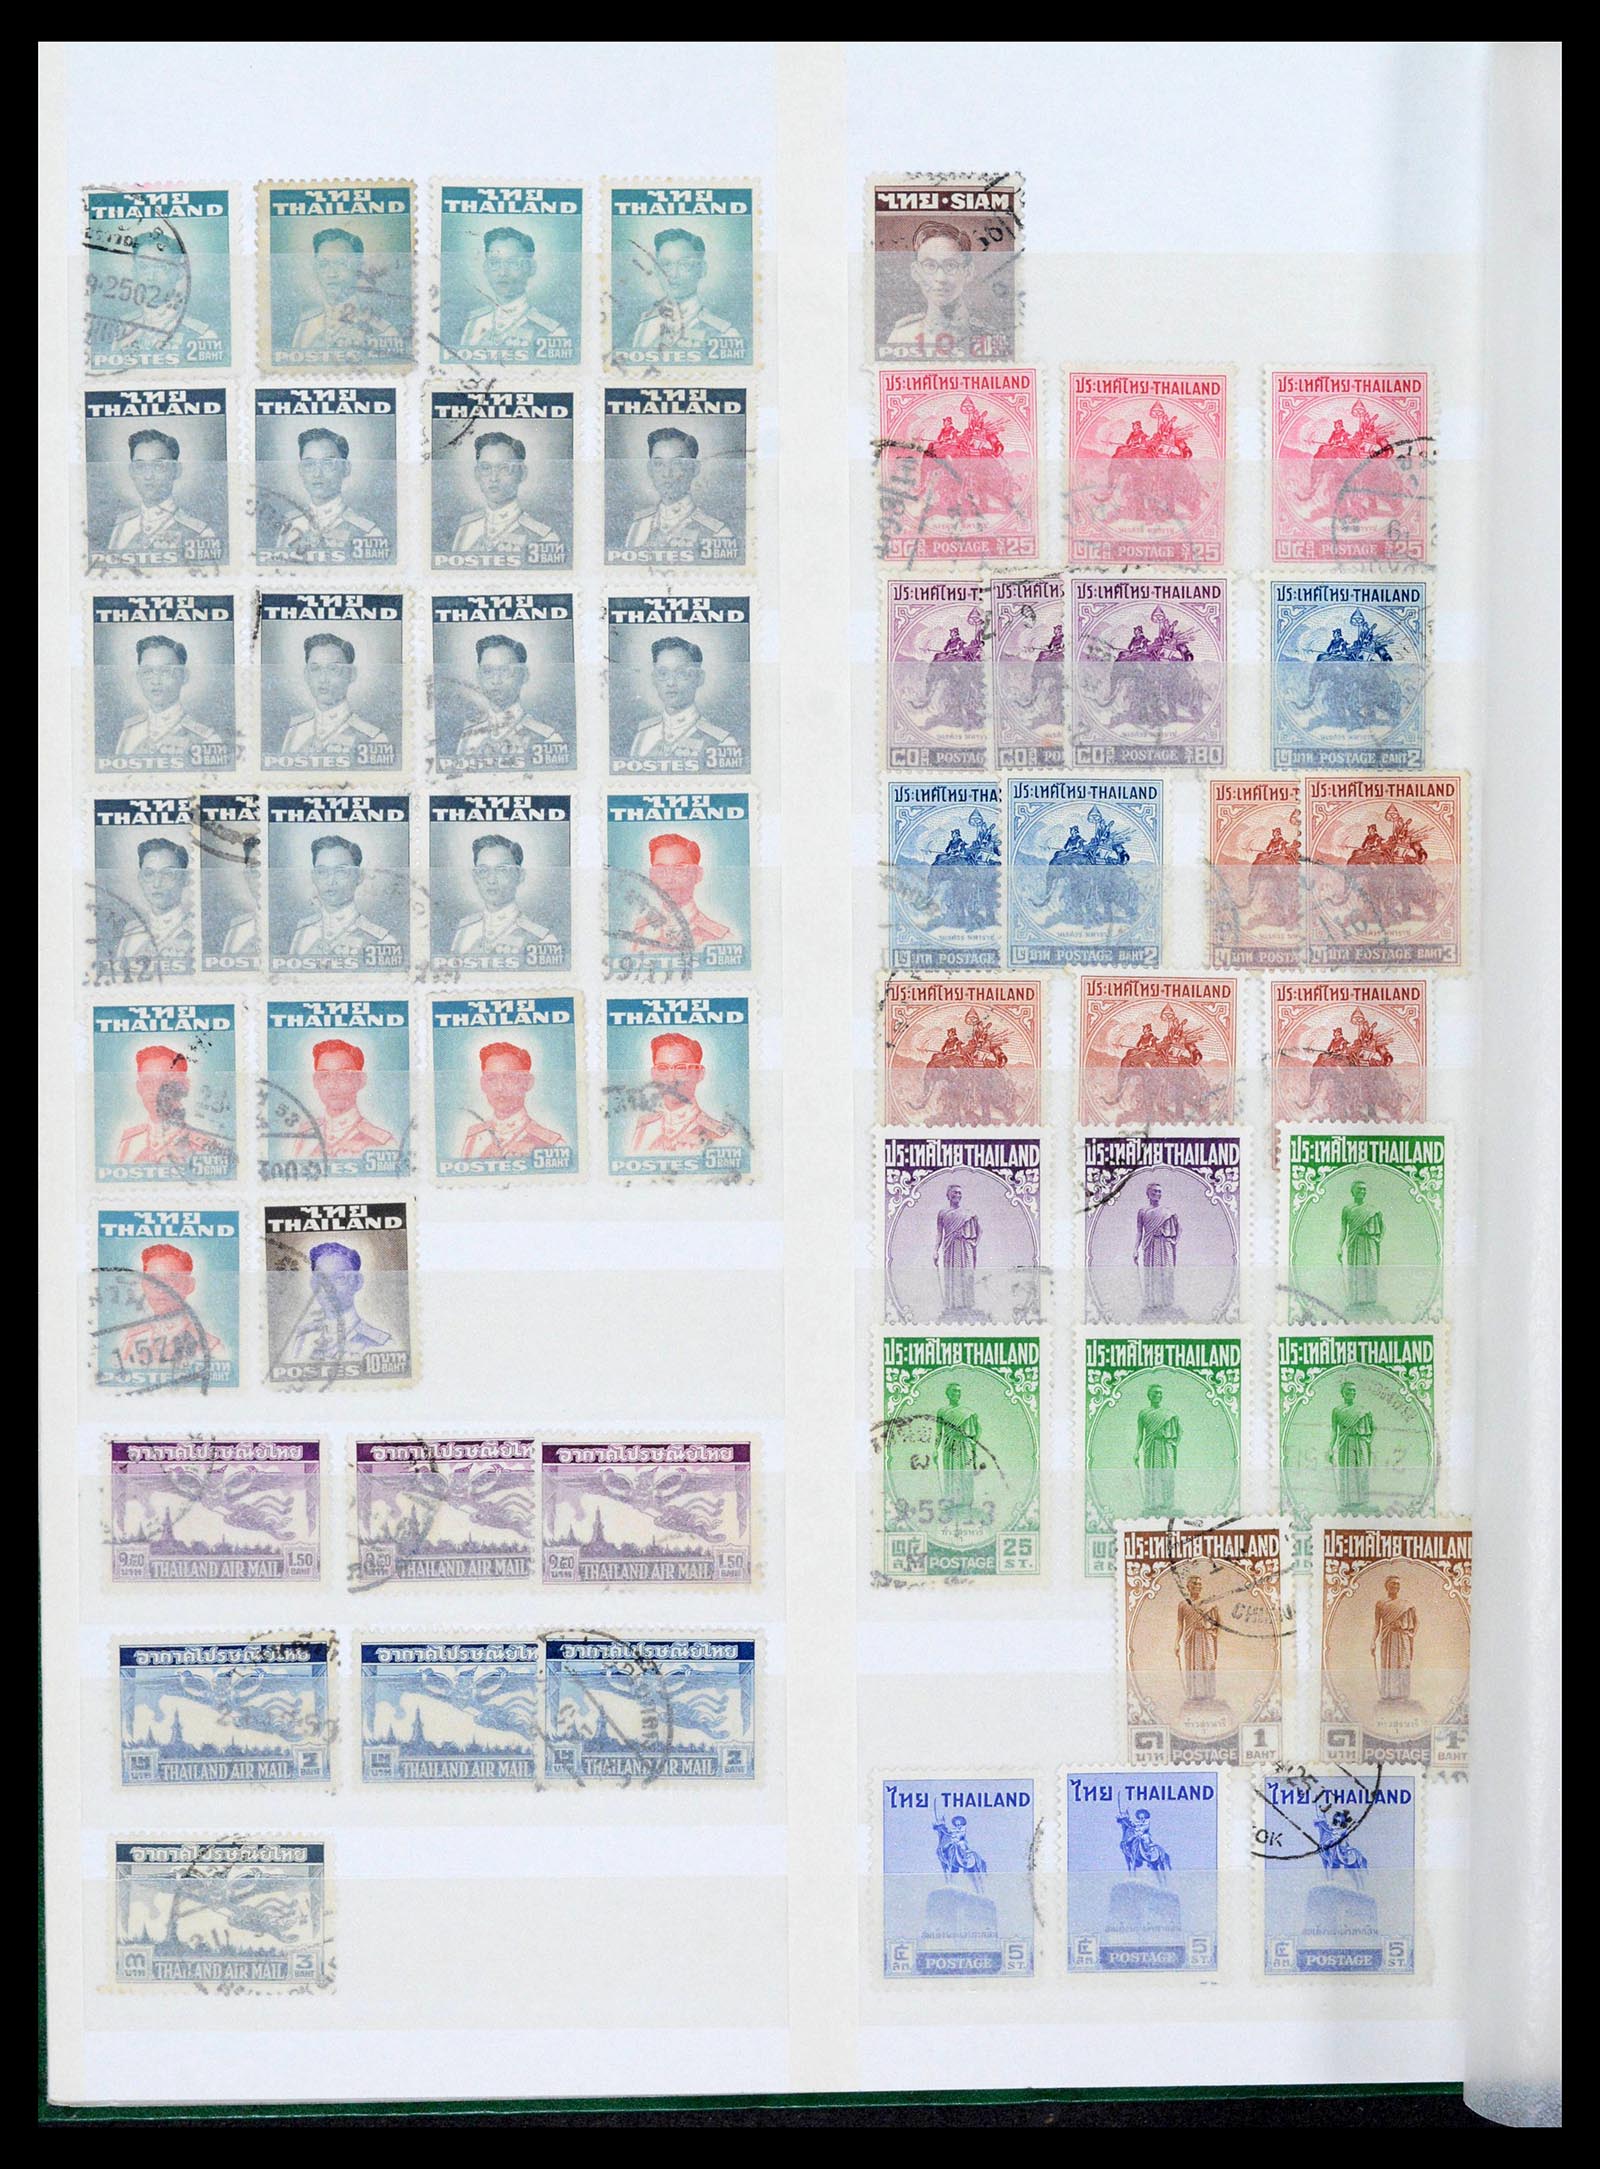 39384 0020 - Stamp collection 39384 Thailand 1883-2014.